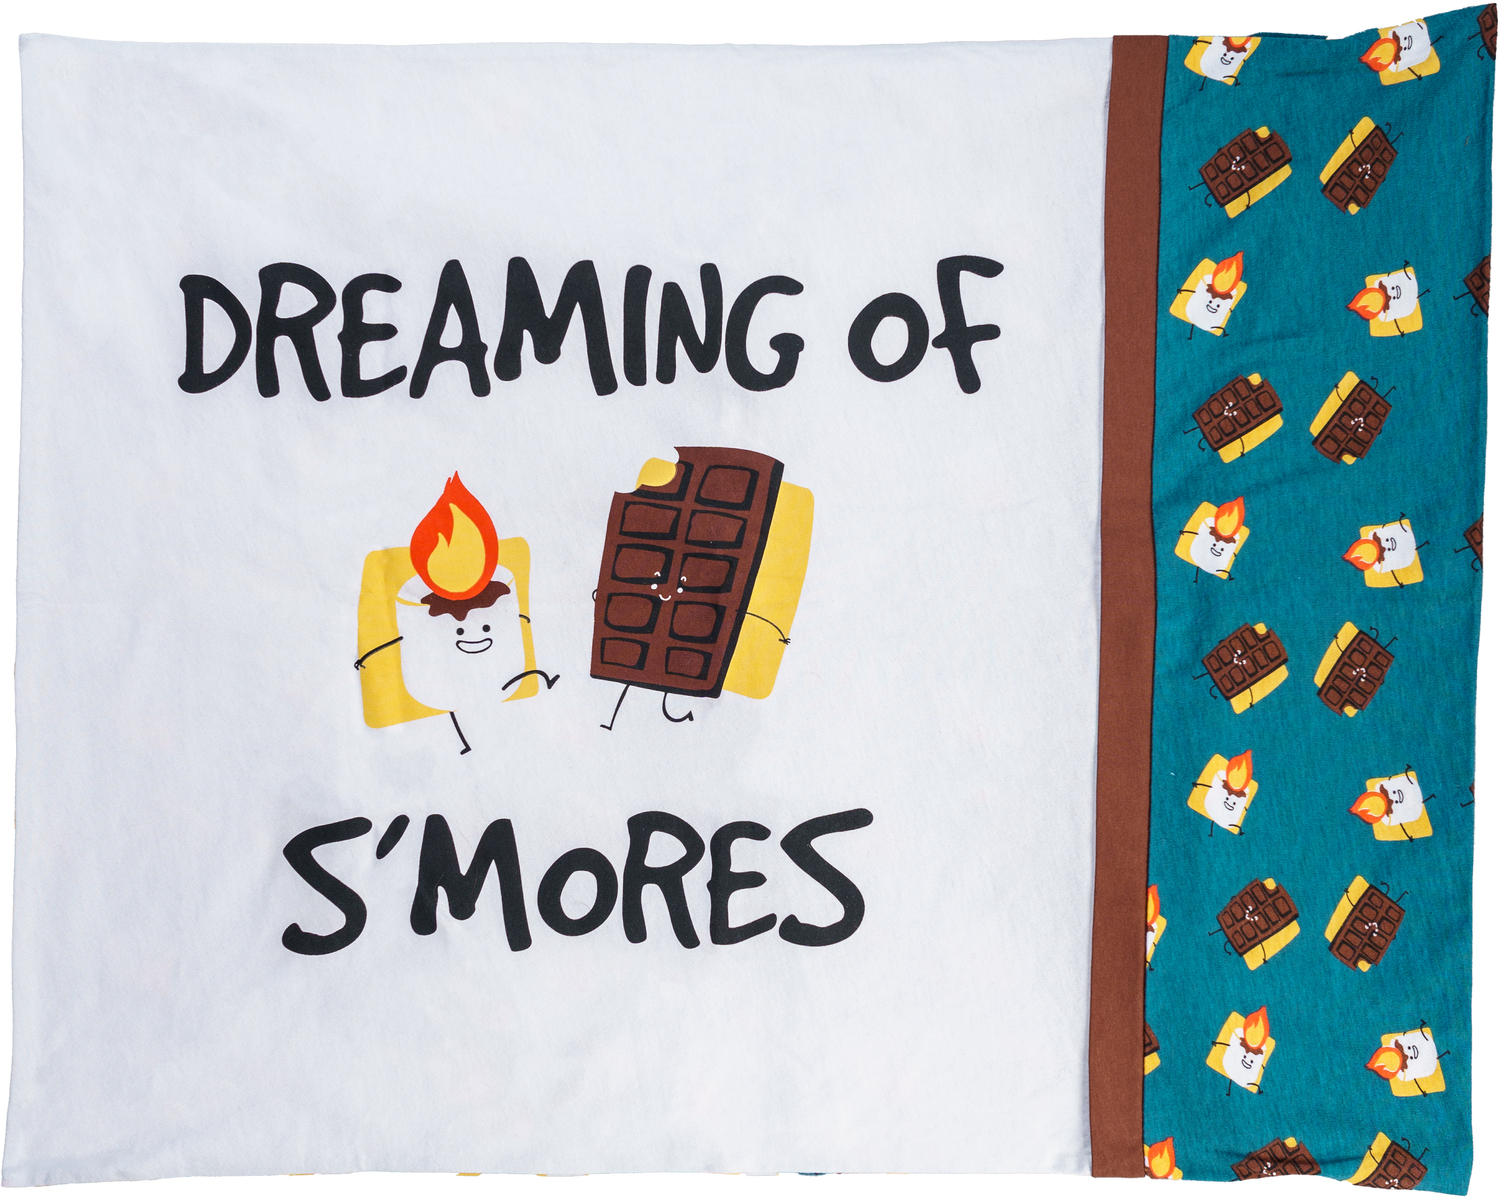 Dreaming of S'mores by Late Night Snacks - Dreaming of S'mores - 20" x 26" Pillowcase